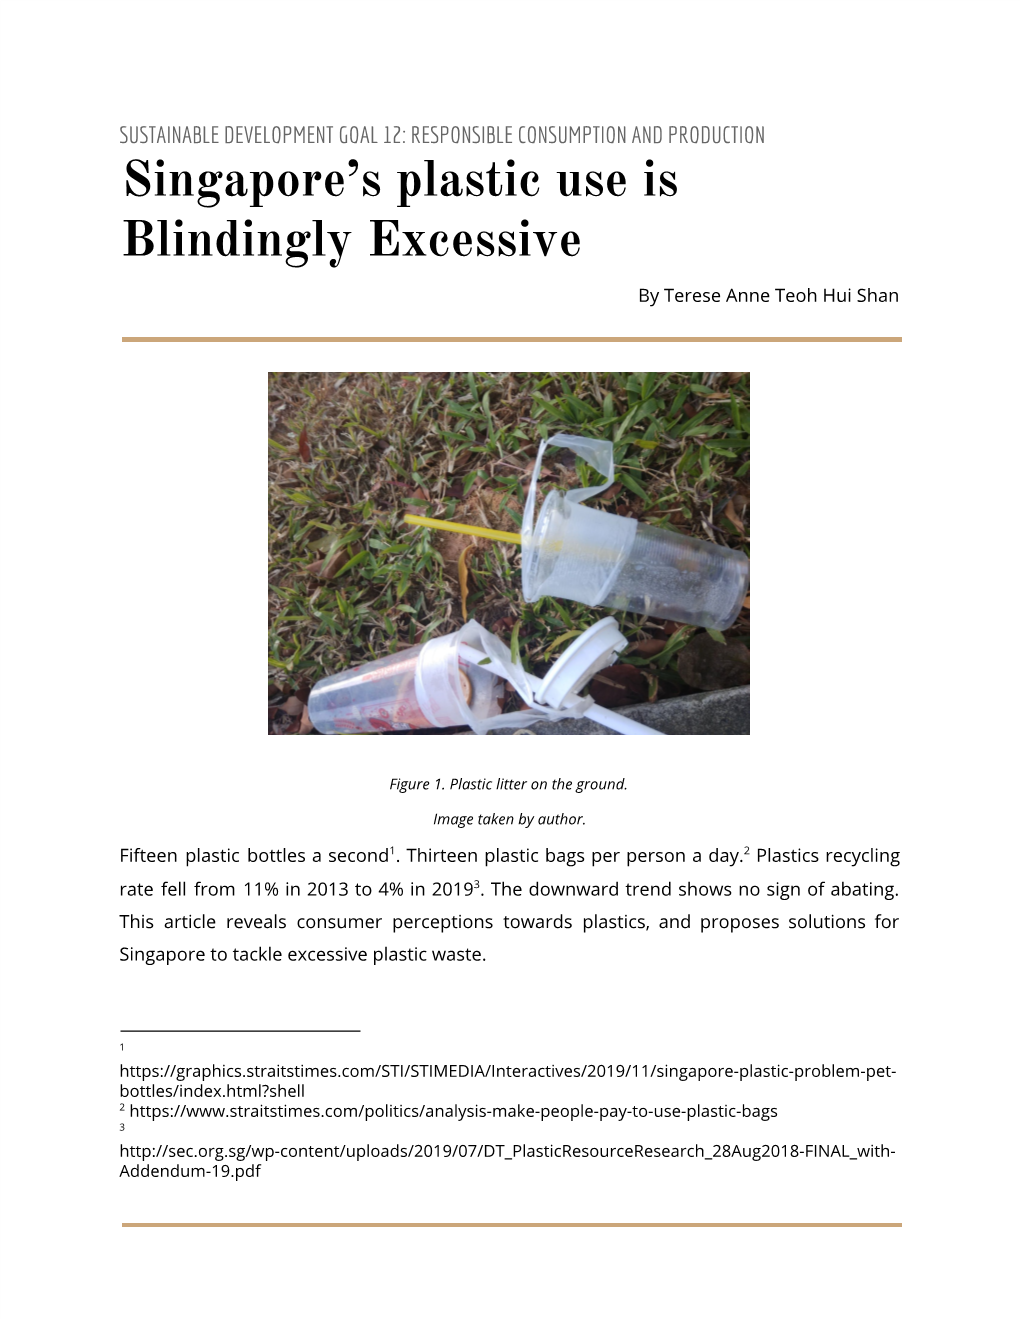 Singapore's Plastic Use Is Blindingly Excessive